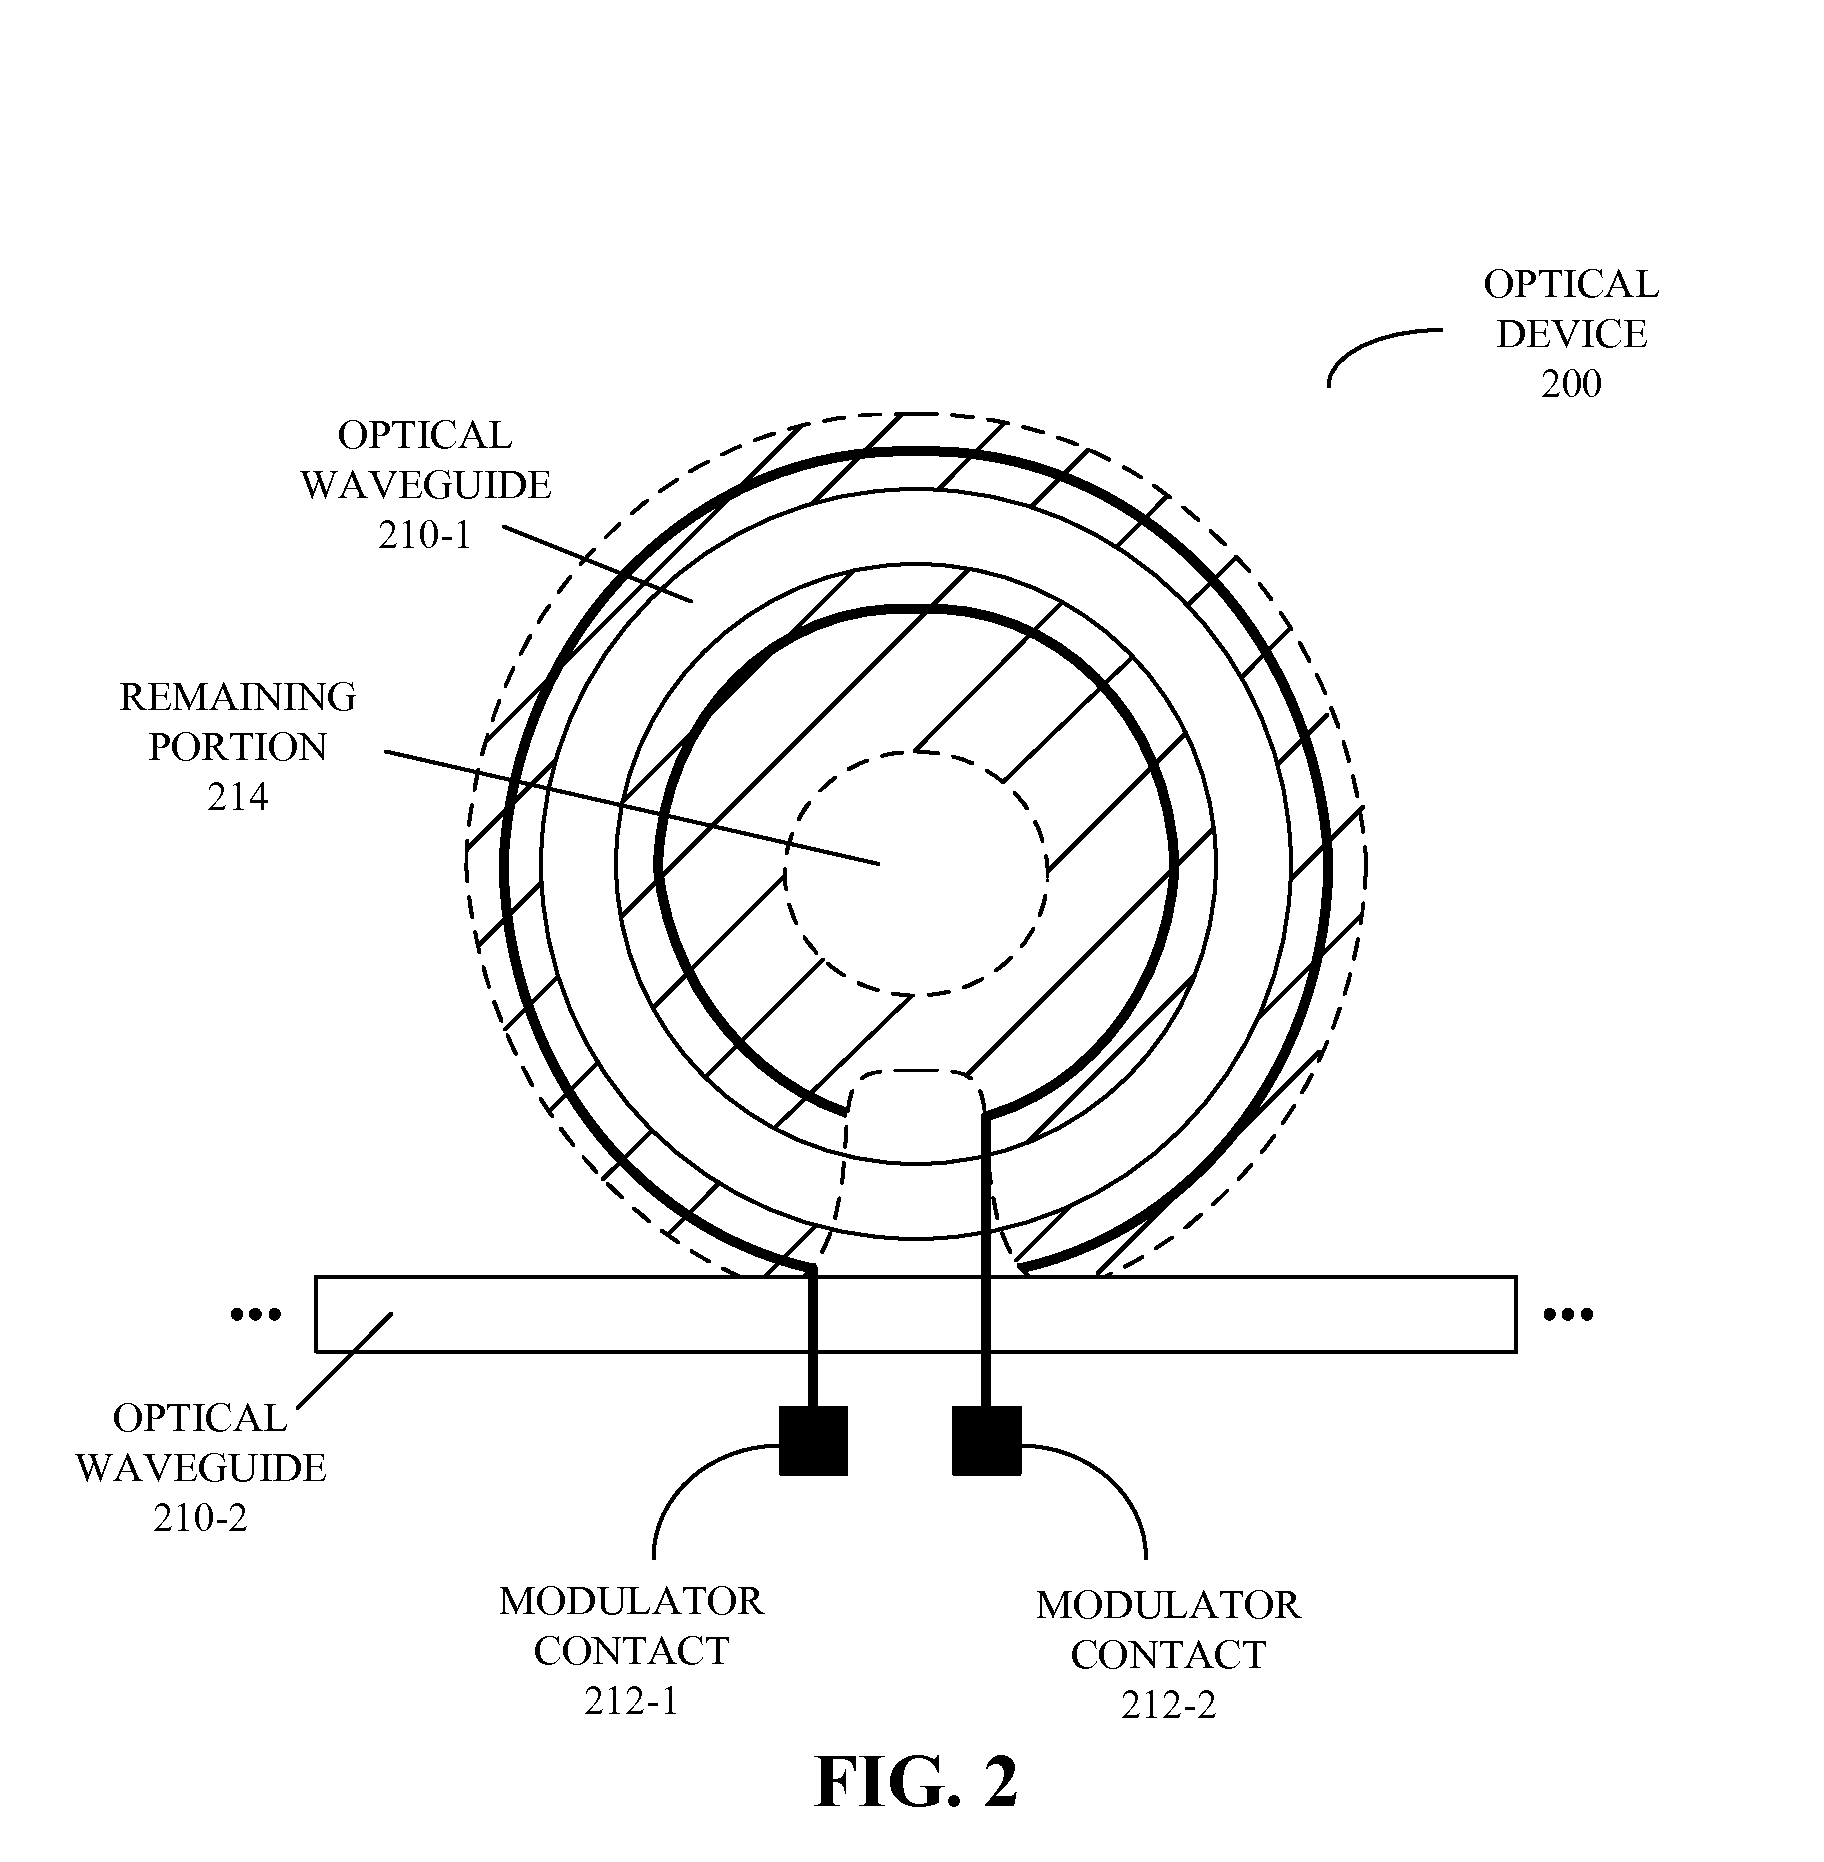 Thermal tuning of an optical device